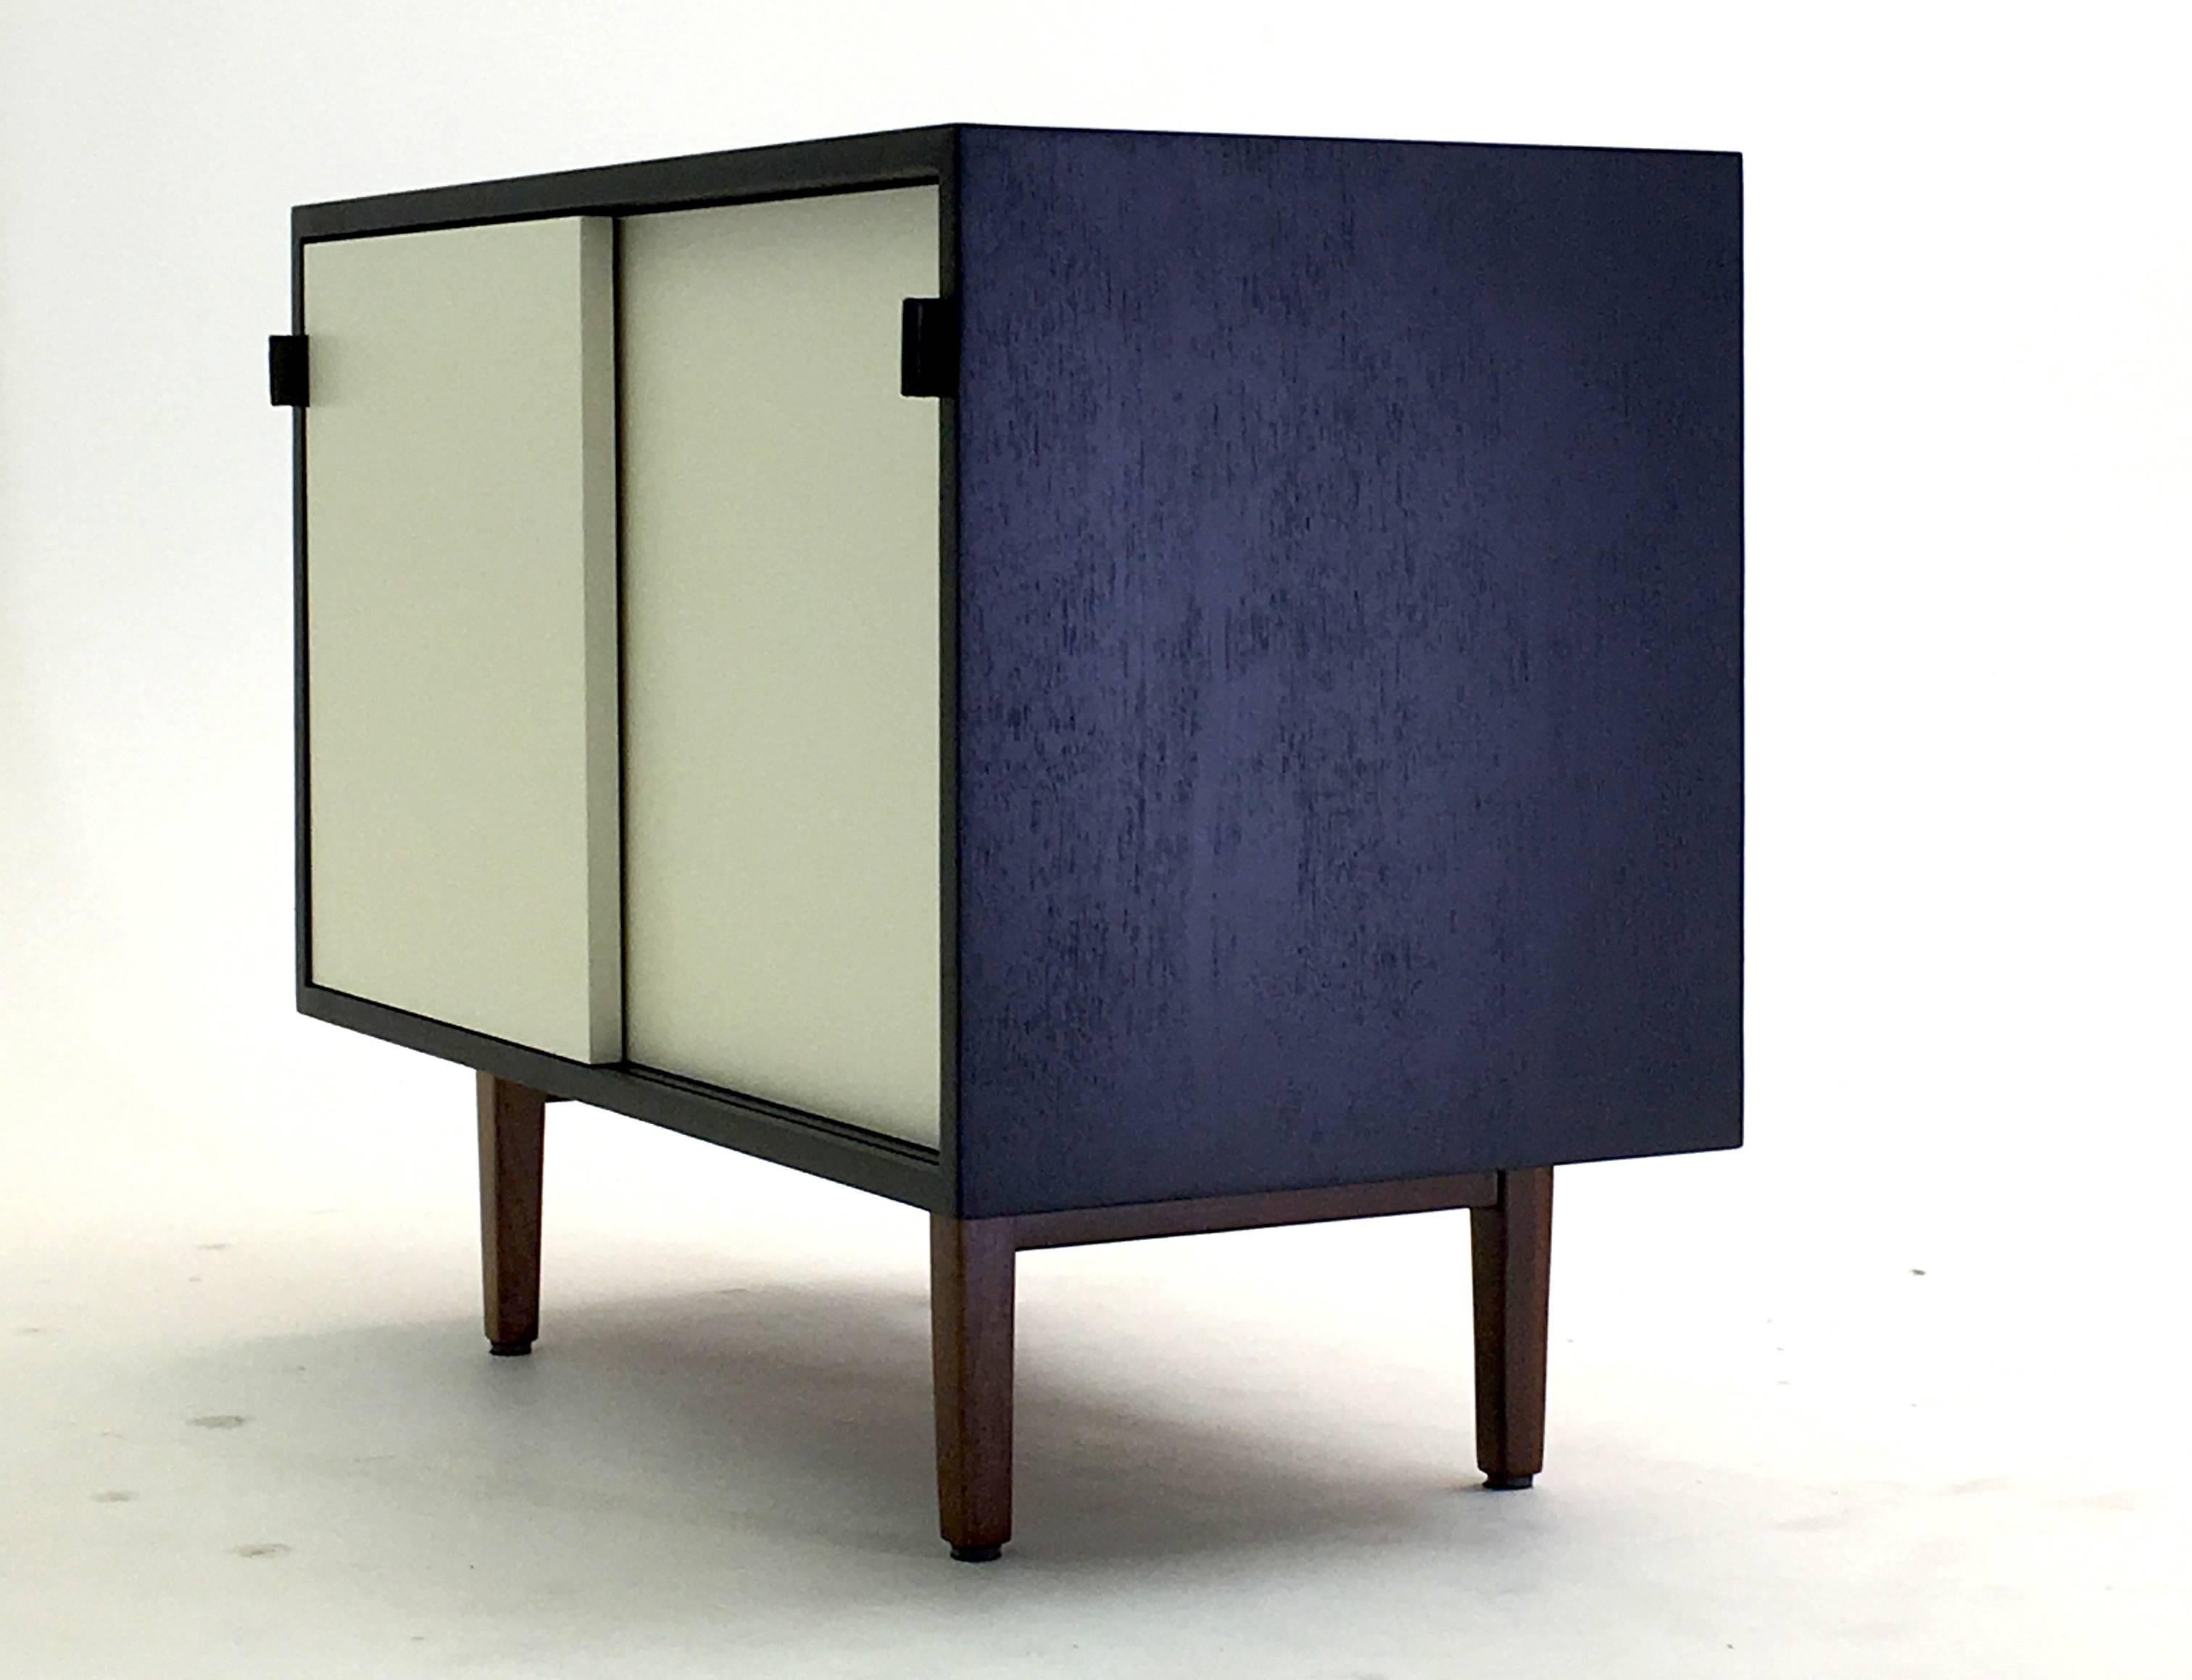 Designed by Florence Knoll and produced, circa 1952, this exquisite cabinet features the sculpted walnut wood legs performed only on the earlier designs in the 1950s and is signed underneath with the Knoll Associates label.

Measures 28"